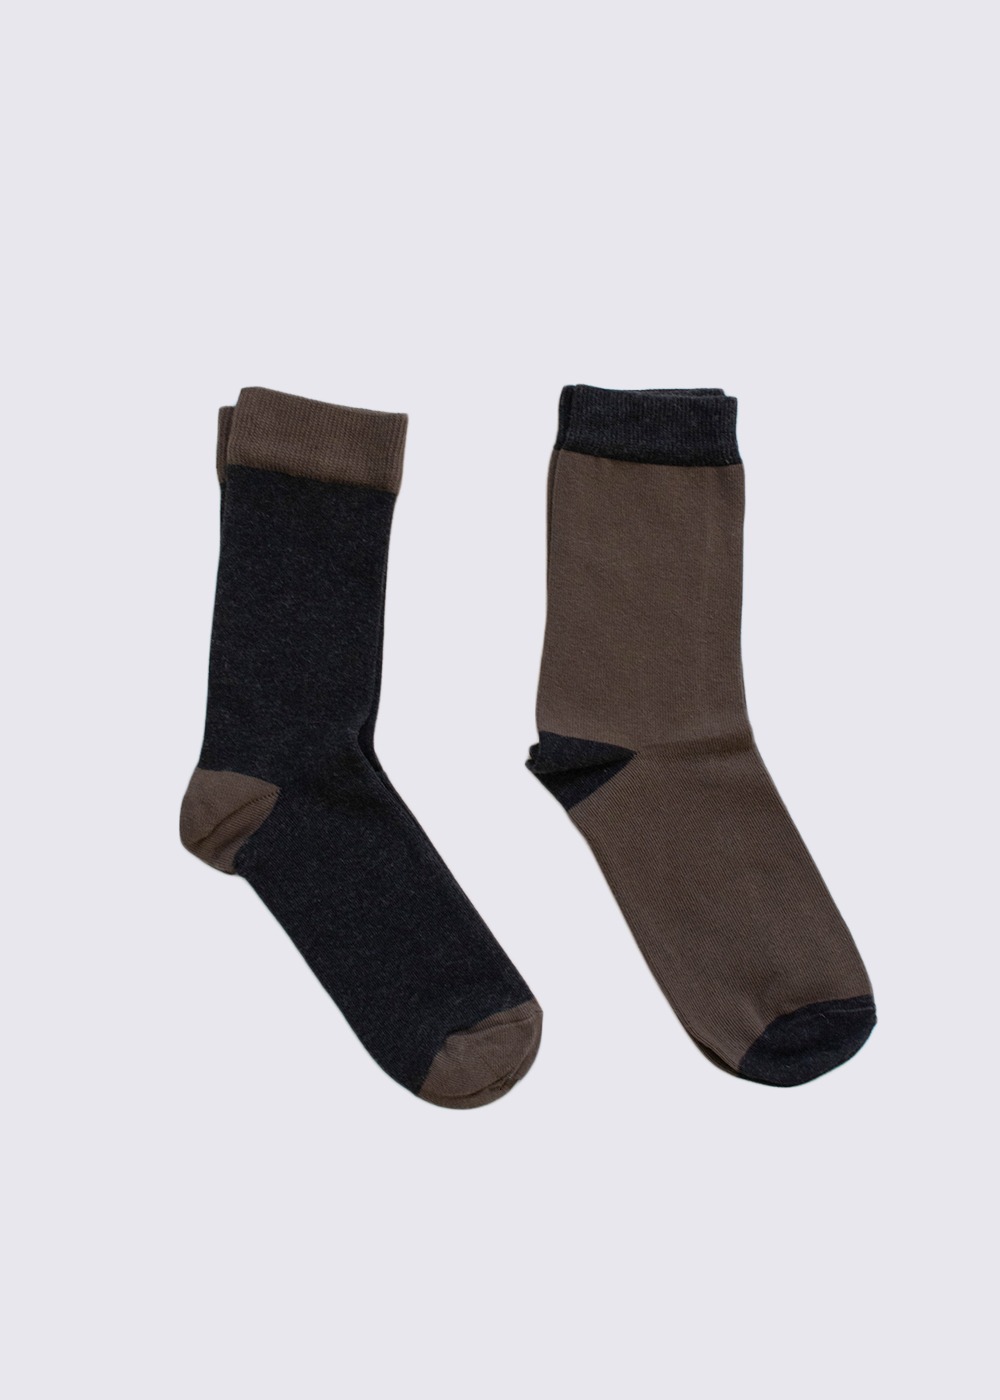 Socks (Two of Set) - Marron Glace, Anthracite